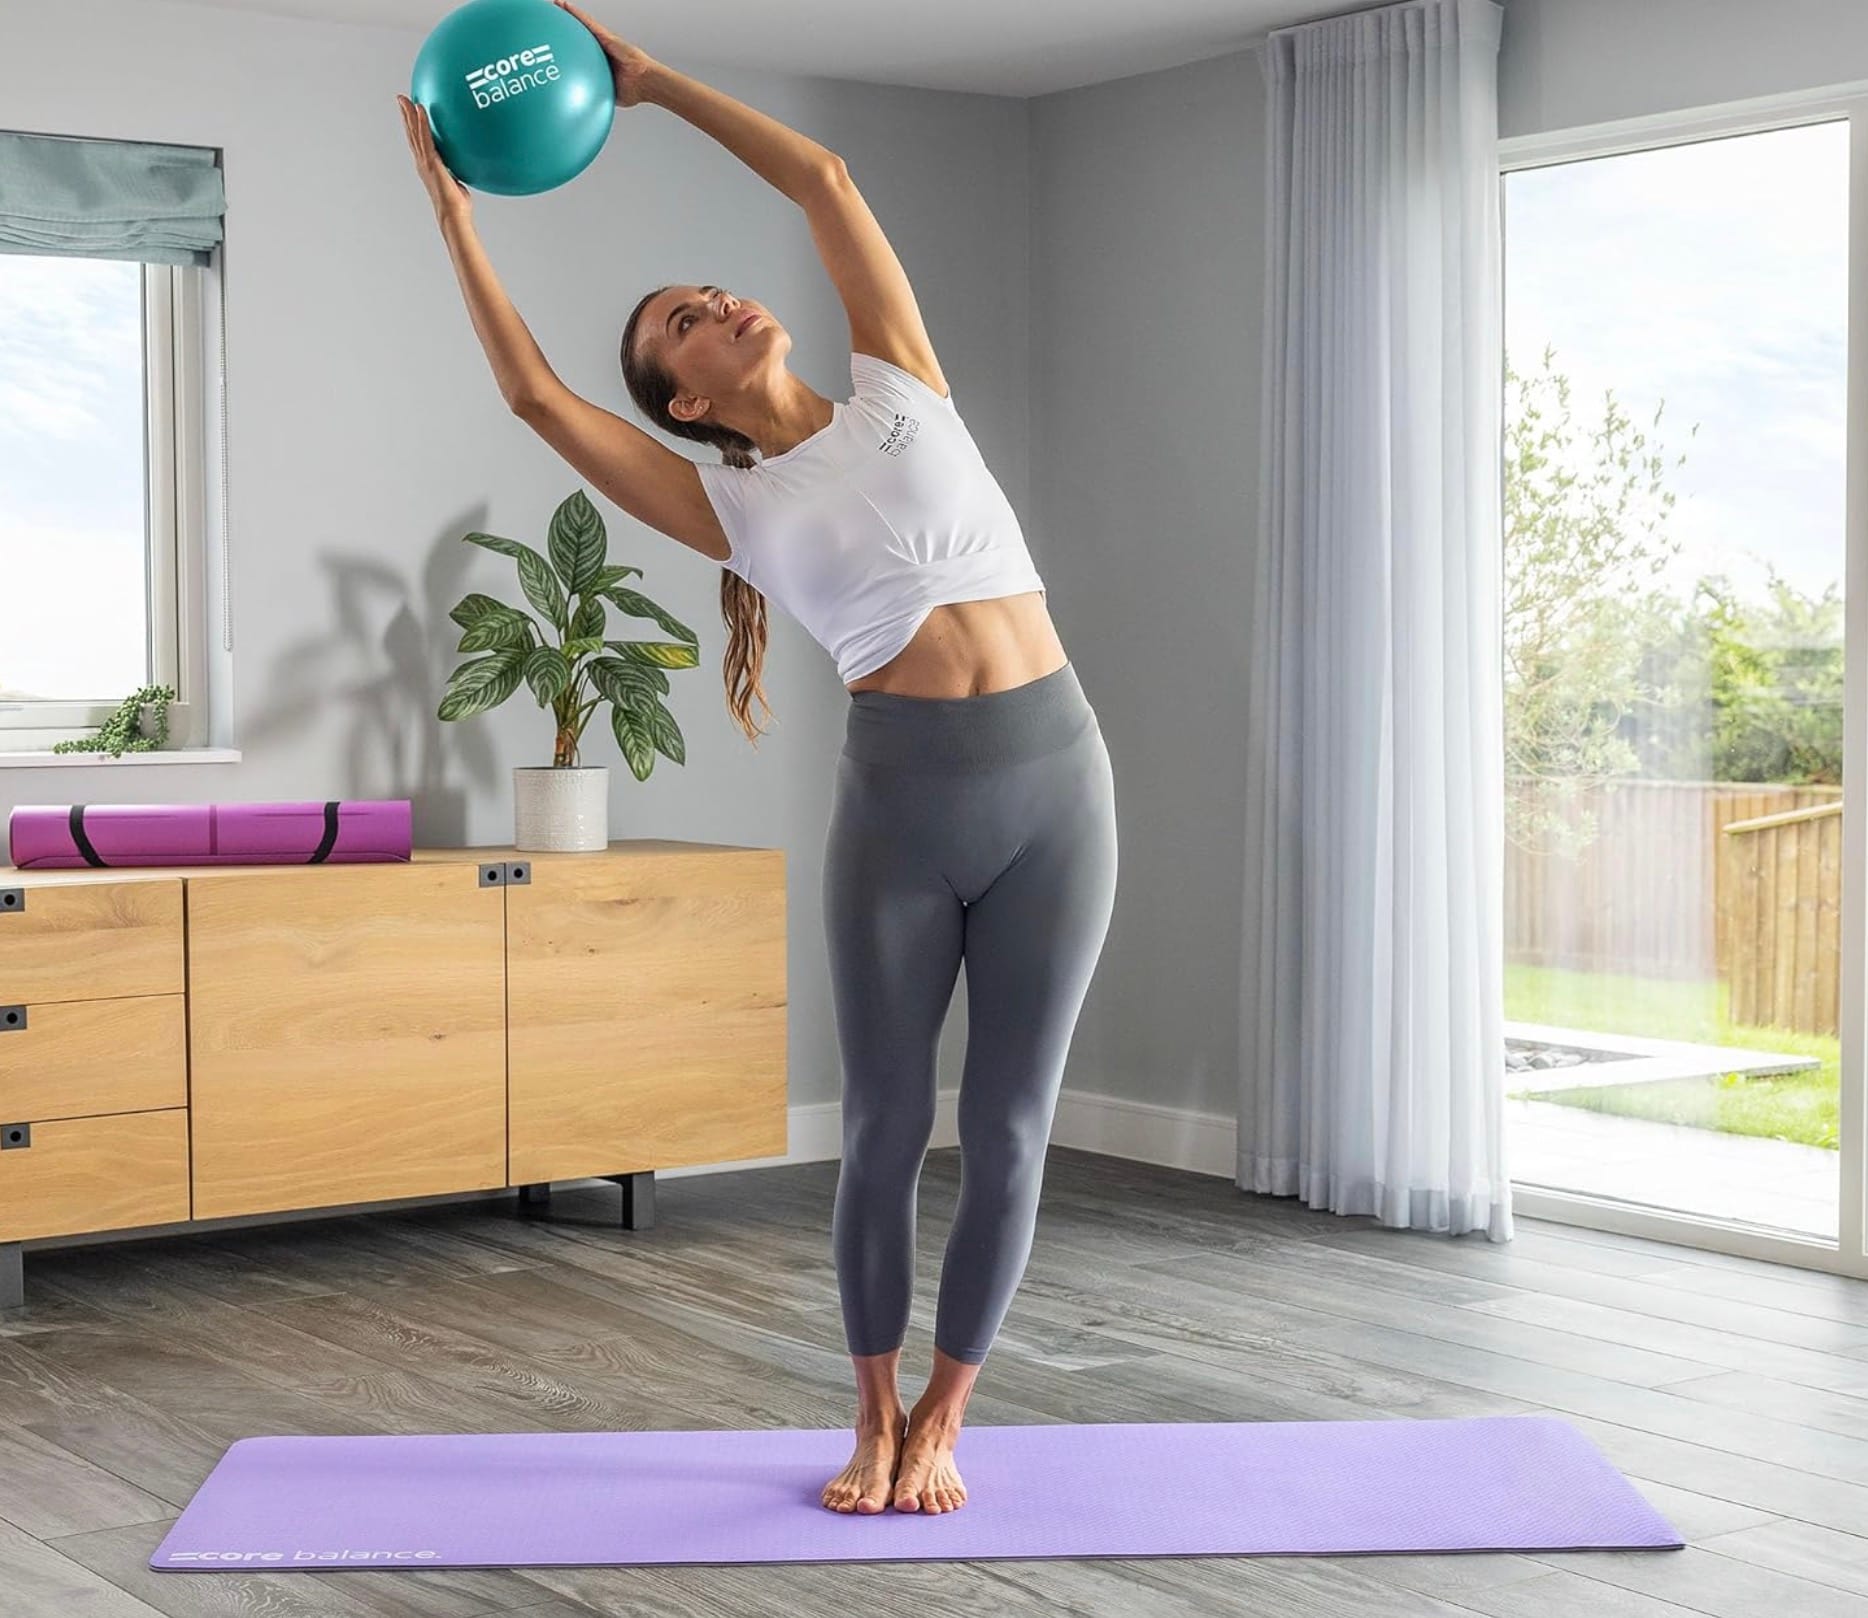 Pilates at Home: The Ultimate Guide for 2024